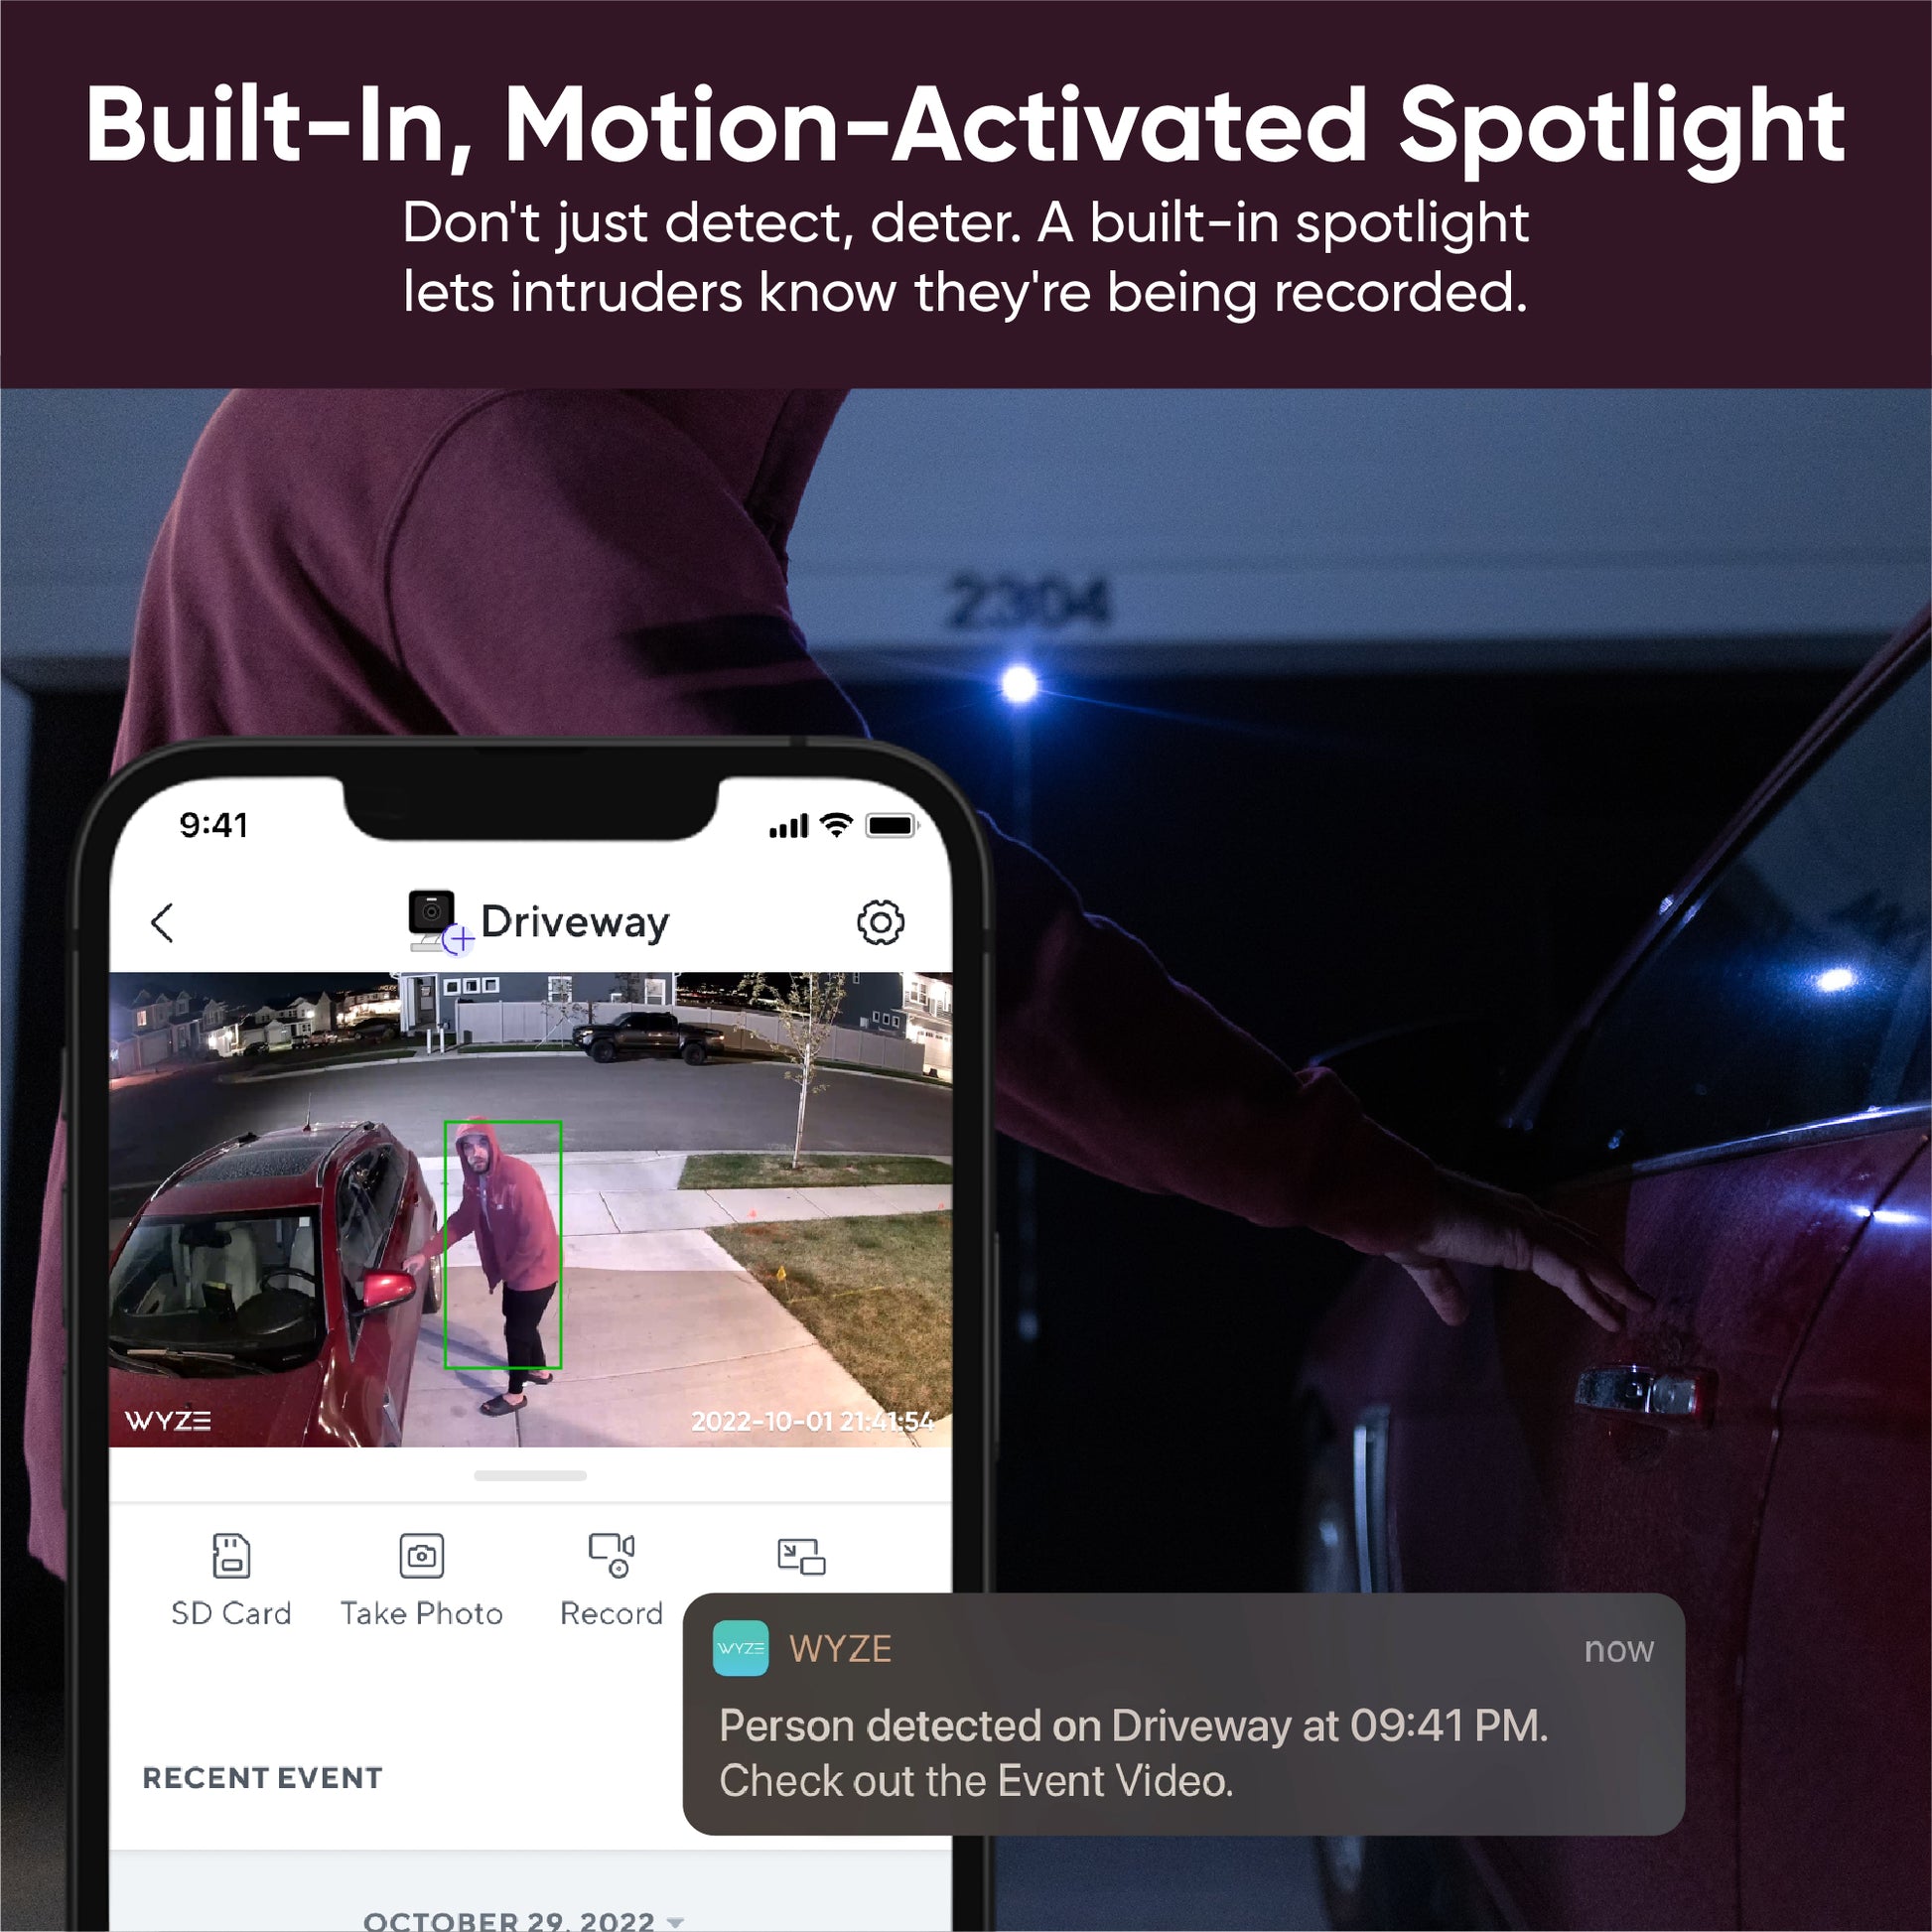 Wyze app on smartphone showing image of a person opening a car. Text overlay "Built-in, Motion-Activated Spotlight."